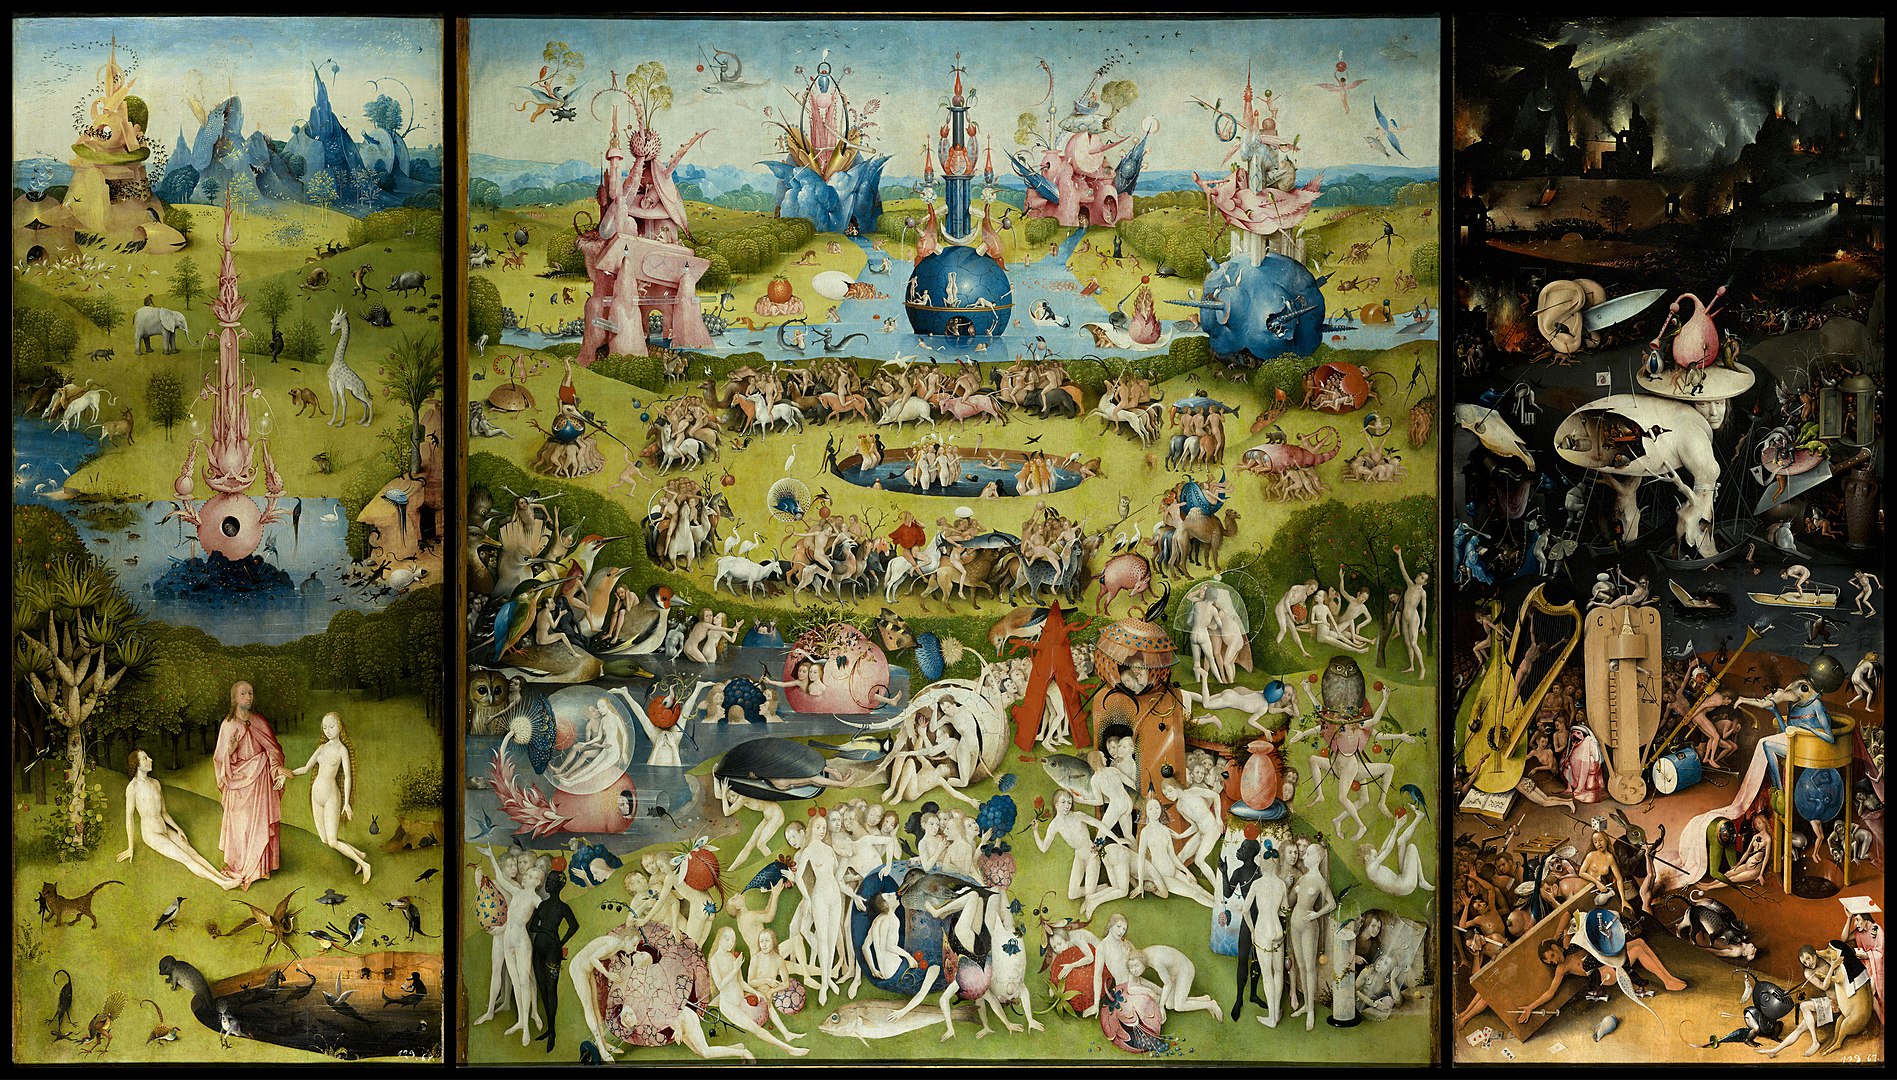 The Garden of Earthly Delights" by Hieronymus Bosch (1490-1510)